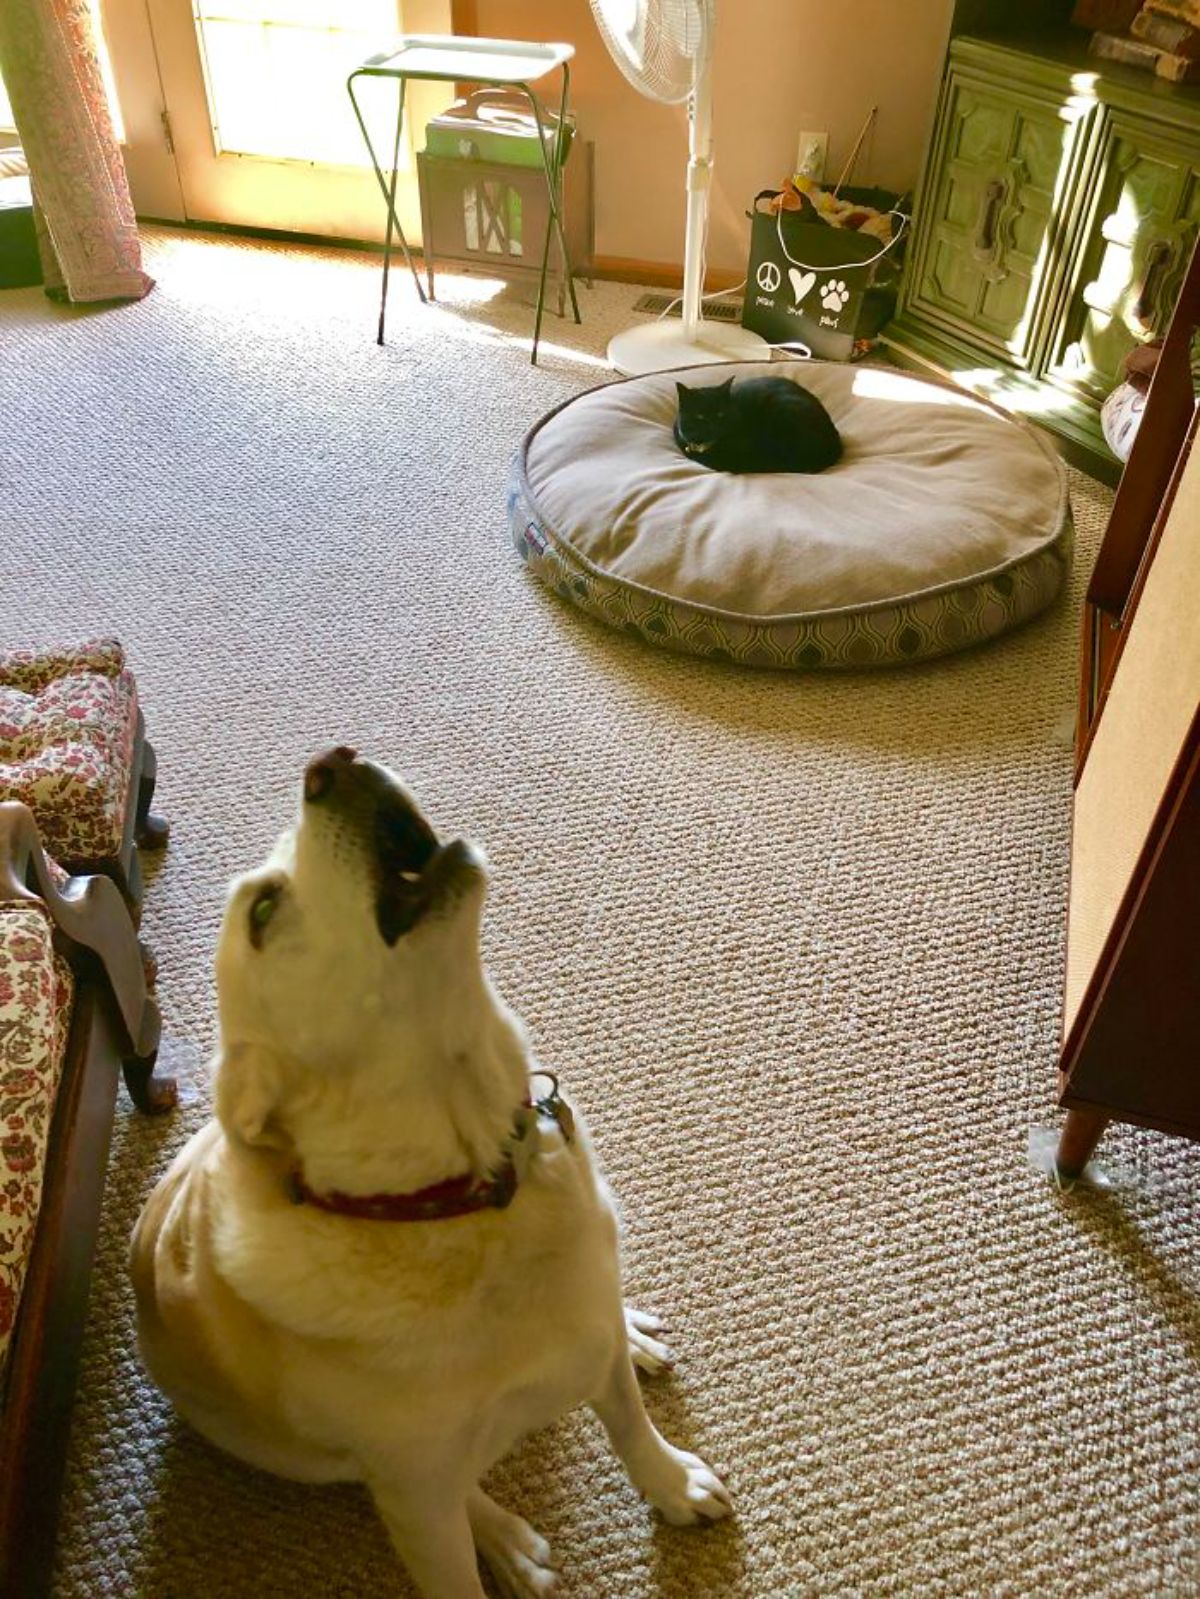 black cat laying on a white dog bed and a yellow labrador retriever howling